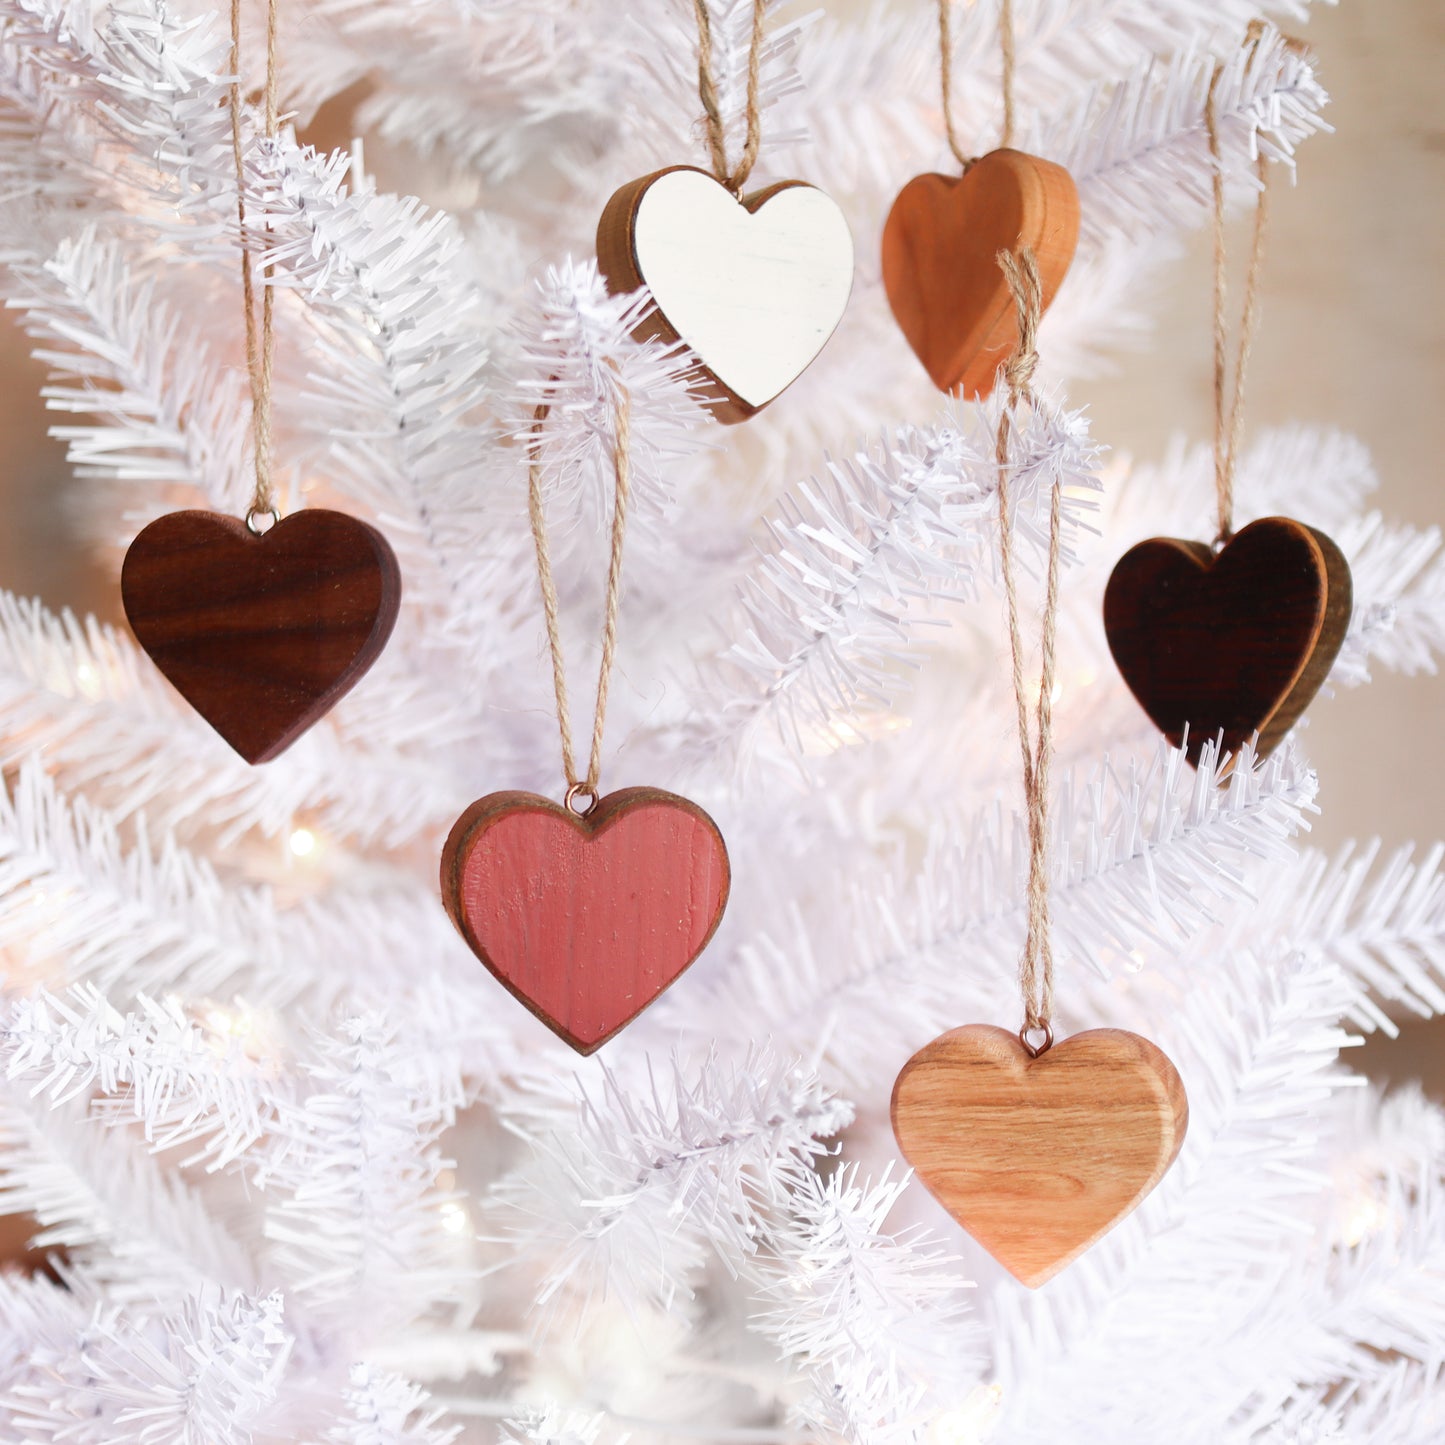 Reclaimed Wood Ornament Collections